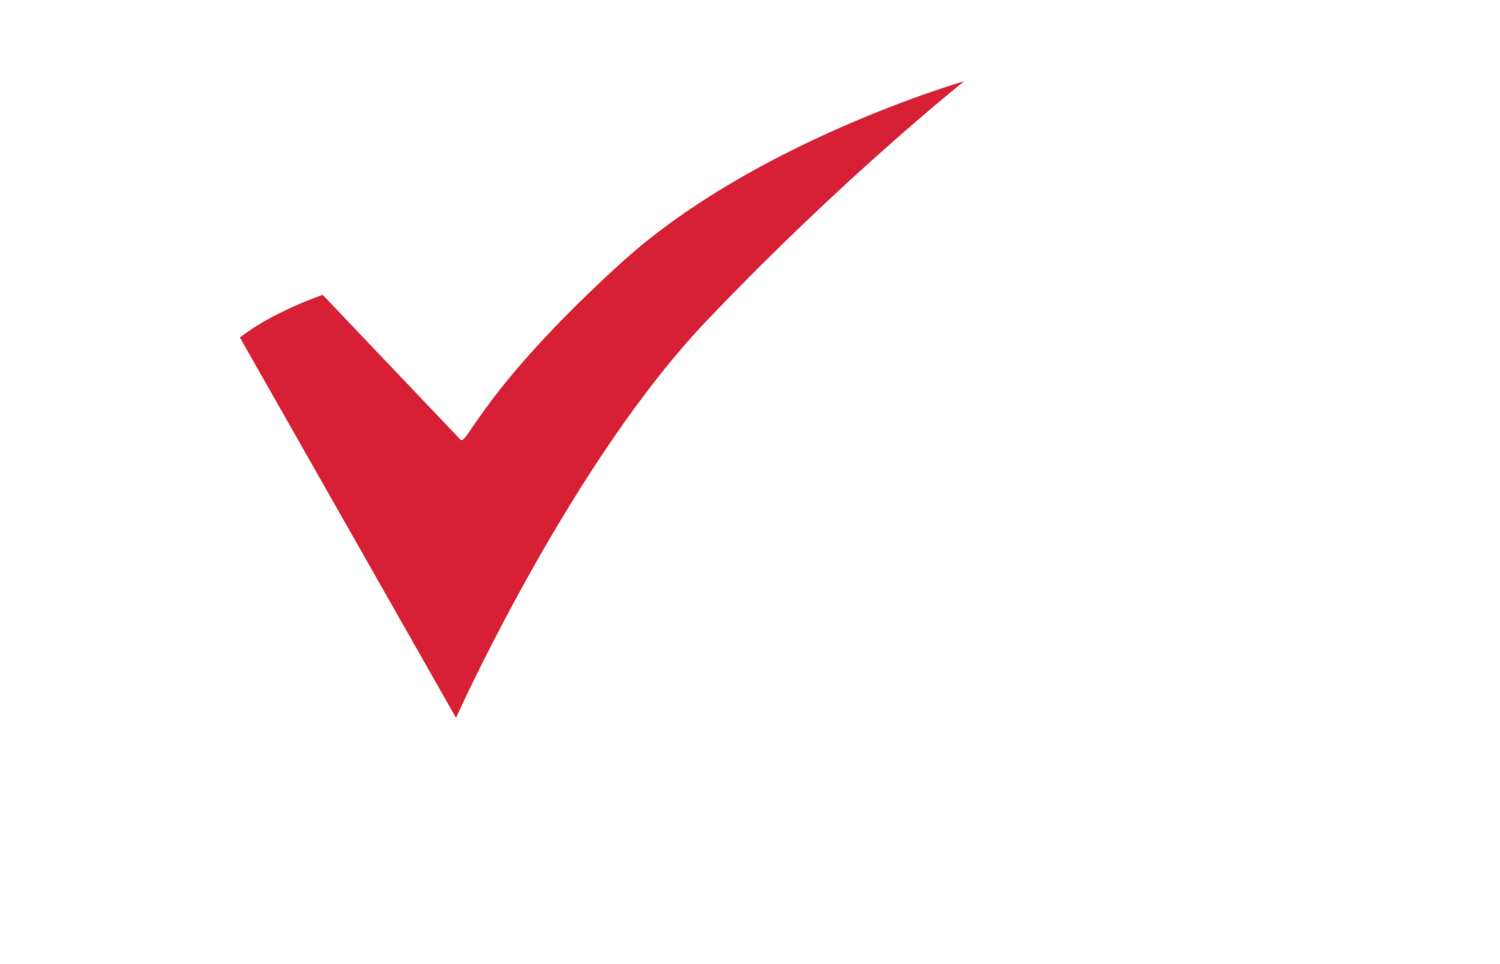 Voting clipart nomination form. Register to vote smith